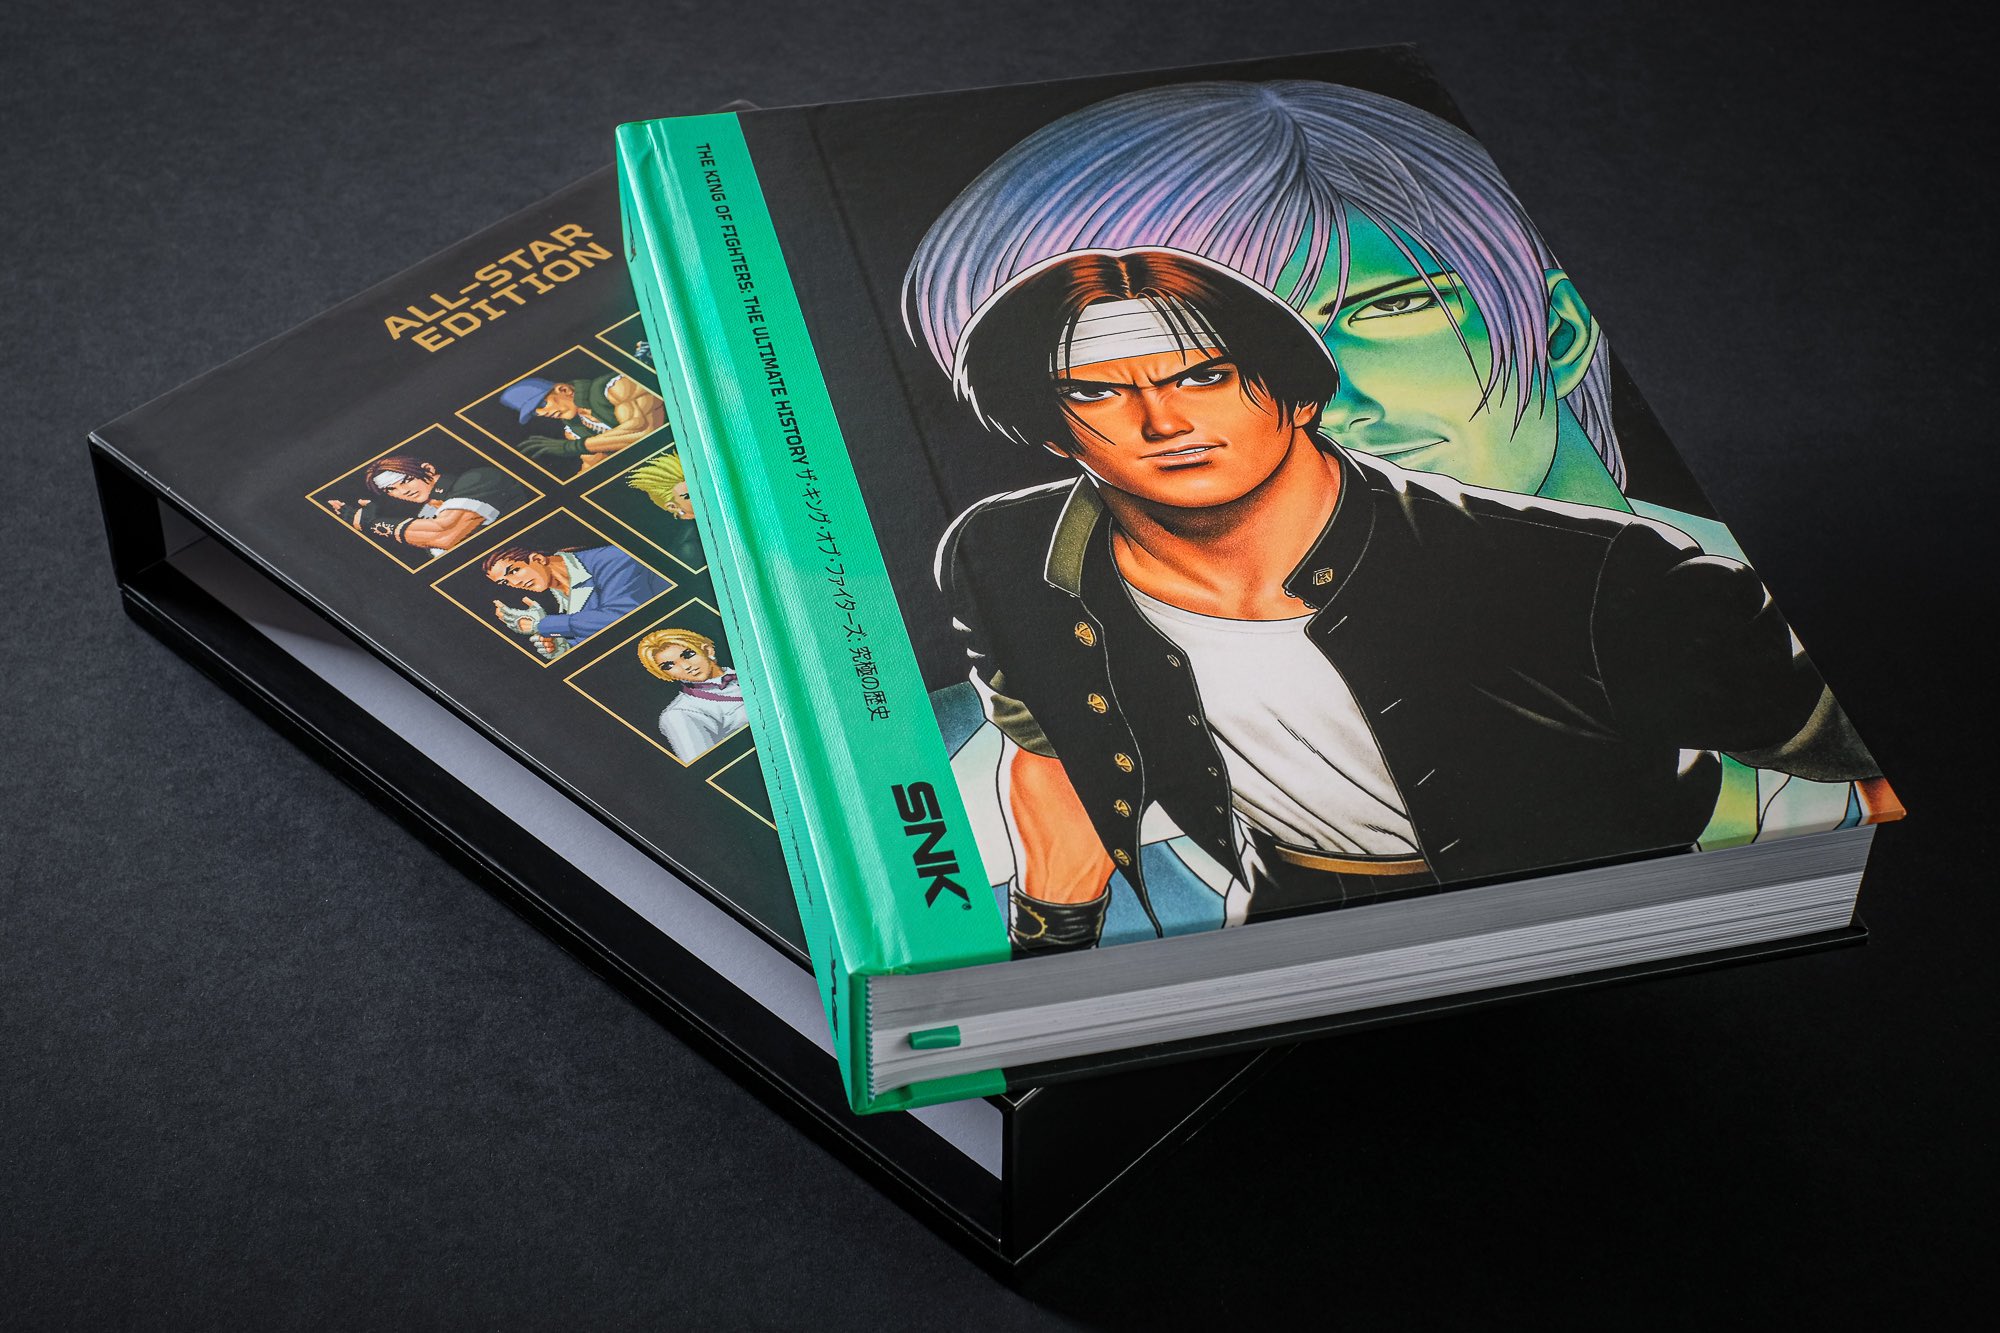 Bitmap Books on X: "THE KING OF FIGHTERS: The Ultimate History